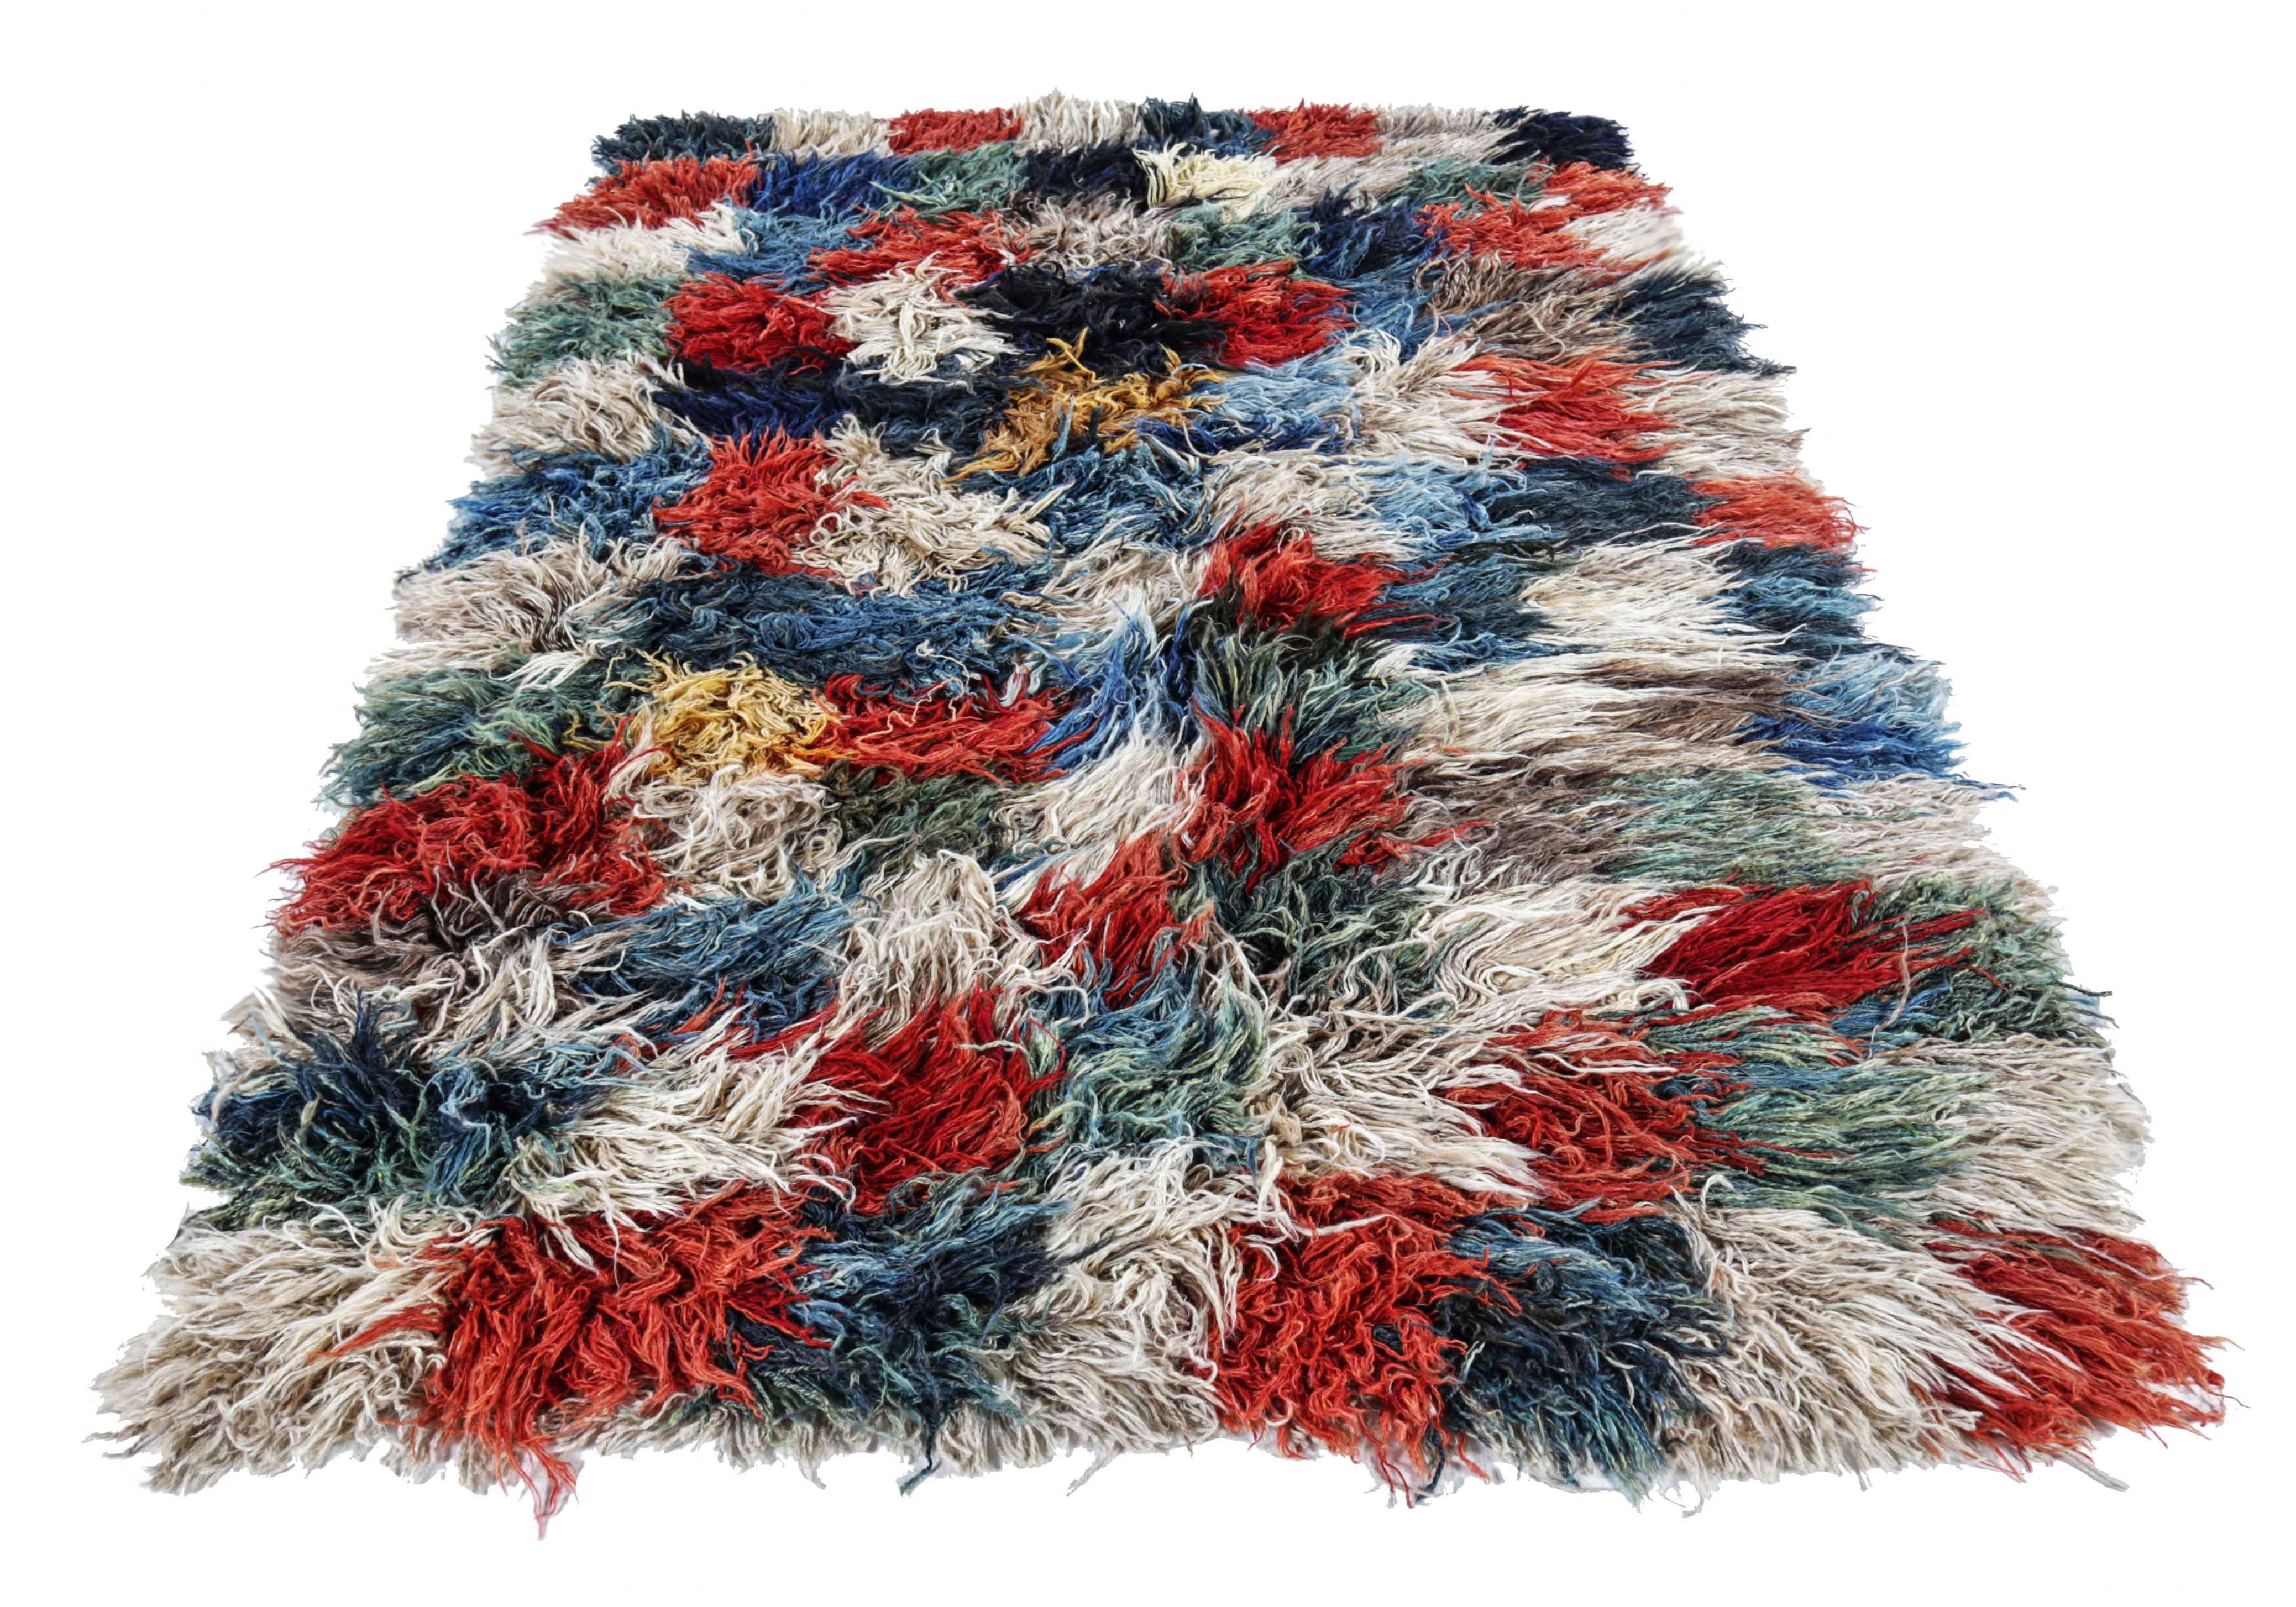 Antique Persian area rug handwoven from the finest sheep’s wool. It’s colored with all-natural vegetable dyes that are safe for humans and pets. It’s a traditional Gabbeh design handwoven by expert artisans. It’s a lovely area rug that can be